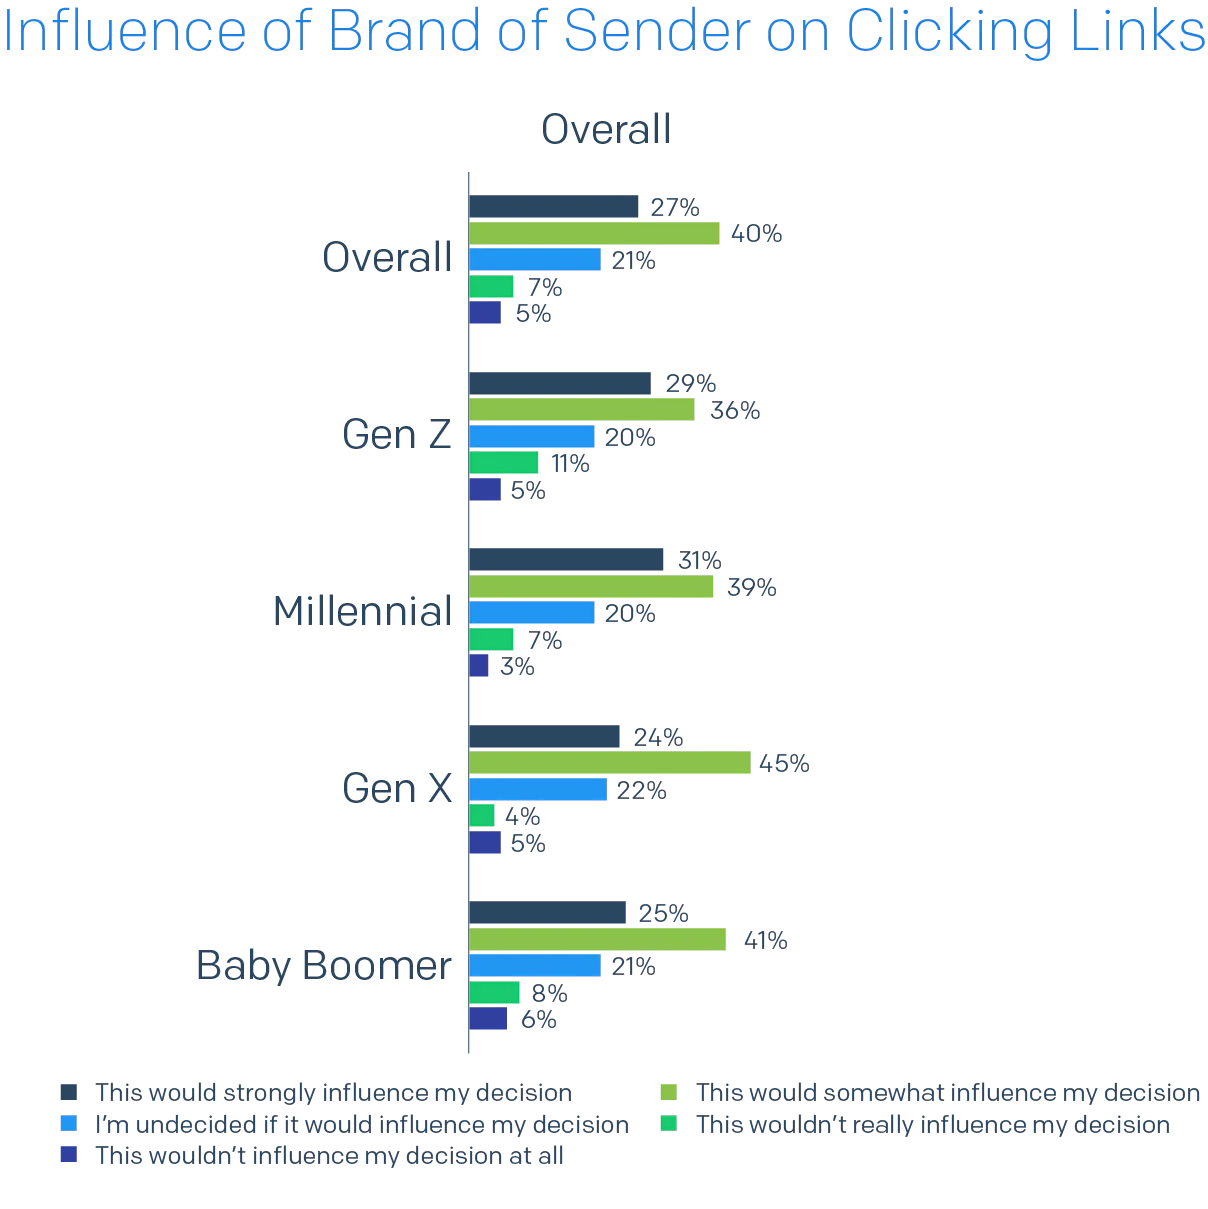 Bar chart of Influence of Brand of Sender on Clicking Links